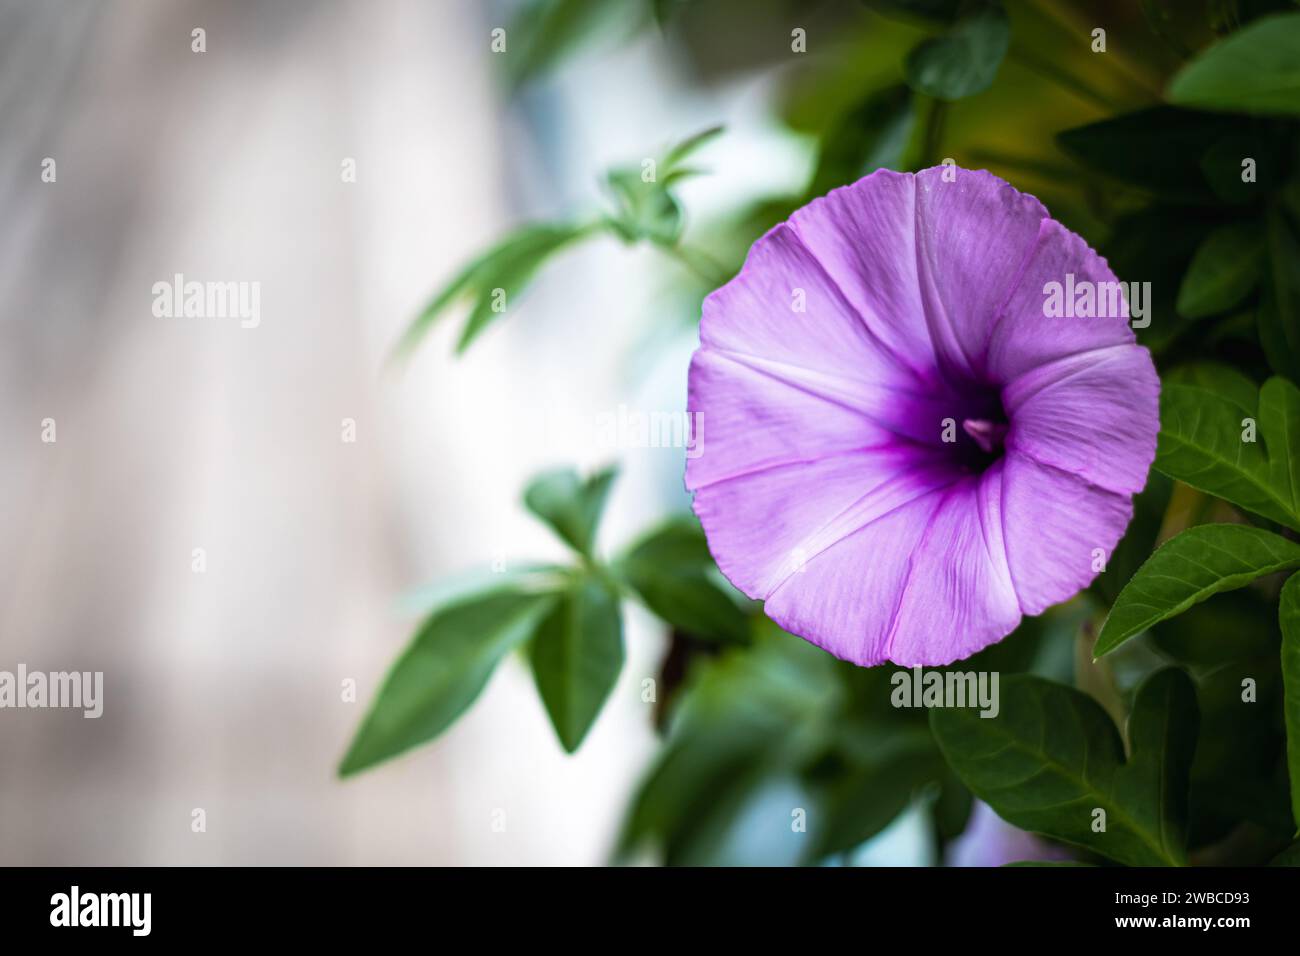 A Close Up Look of Ipomoea Cairica Flower Stock Photo